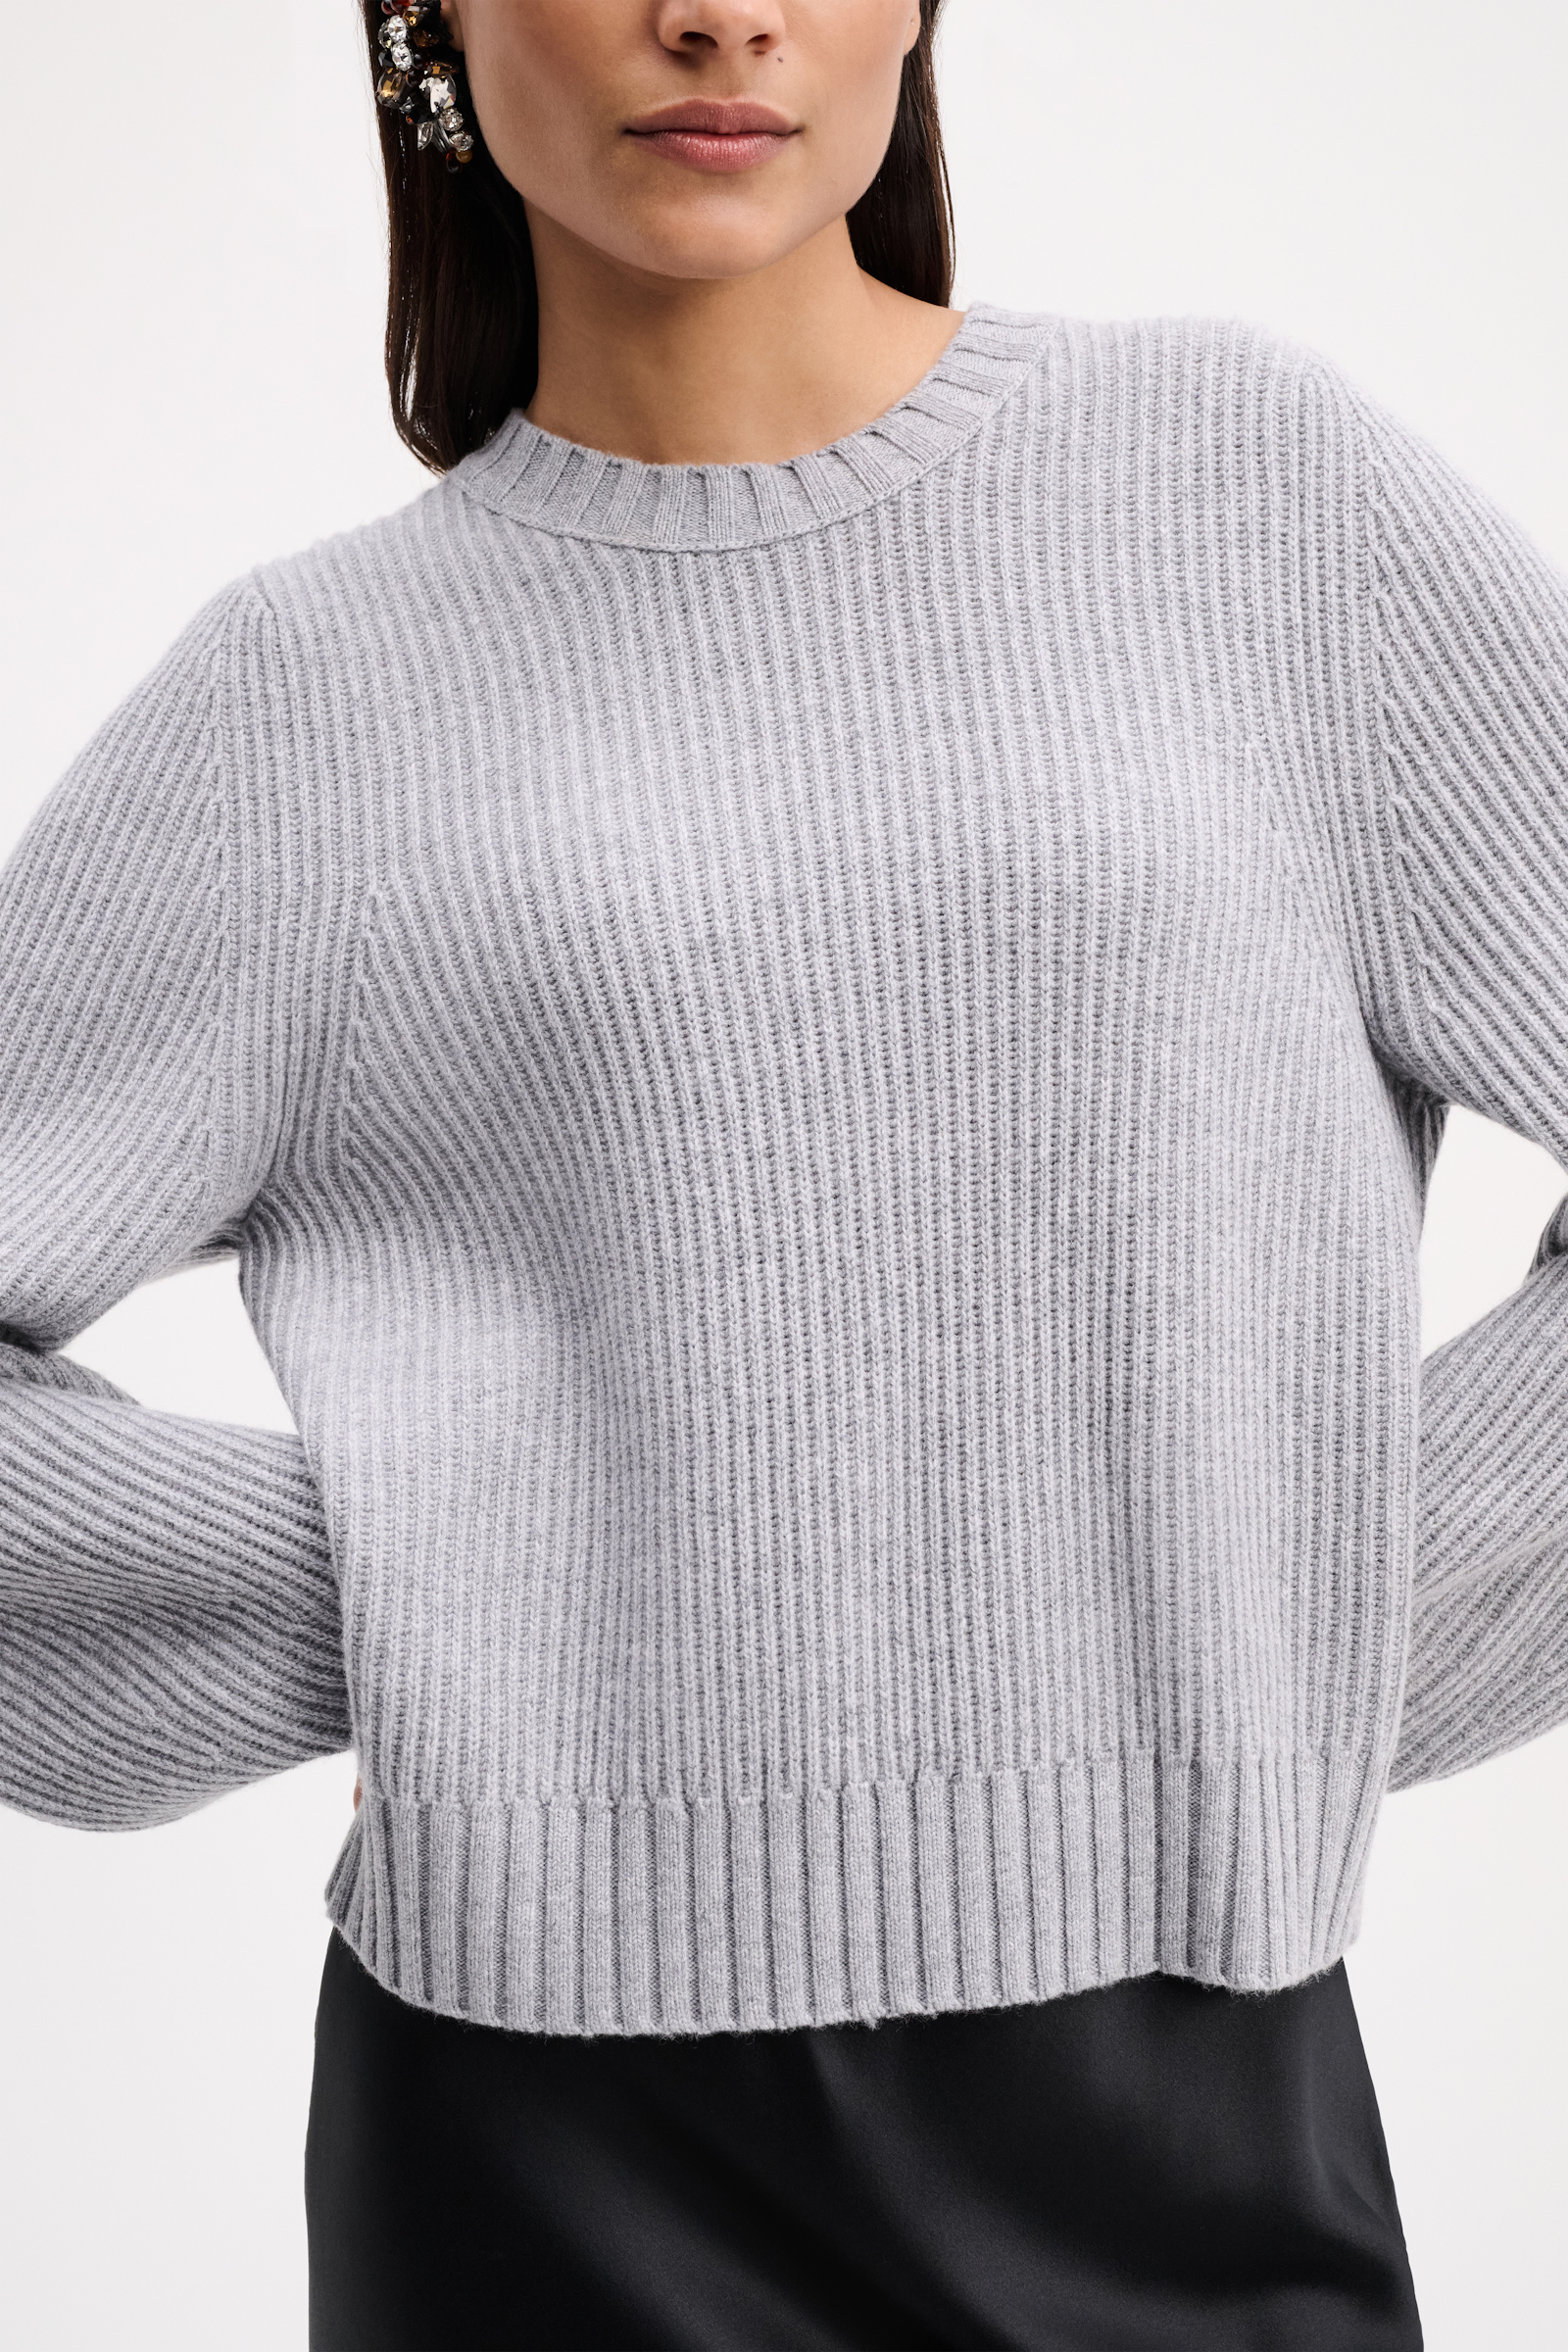 Dorothee Schumacher RIBBED PULLOVER IN MERINO AND CASHMERE medium grey